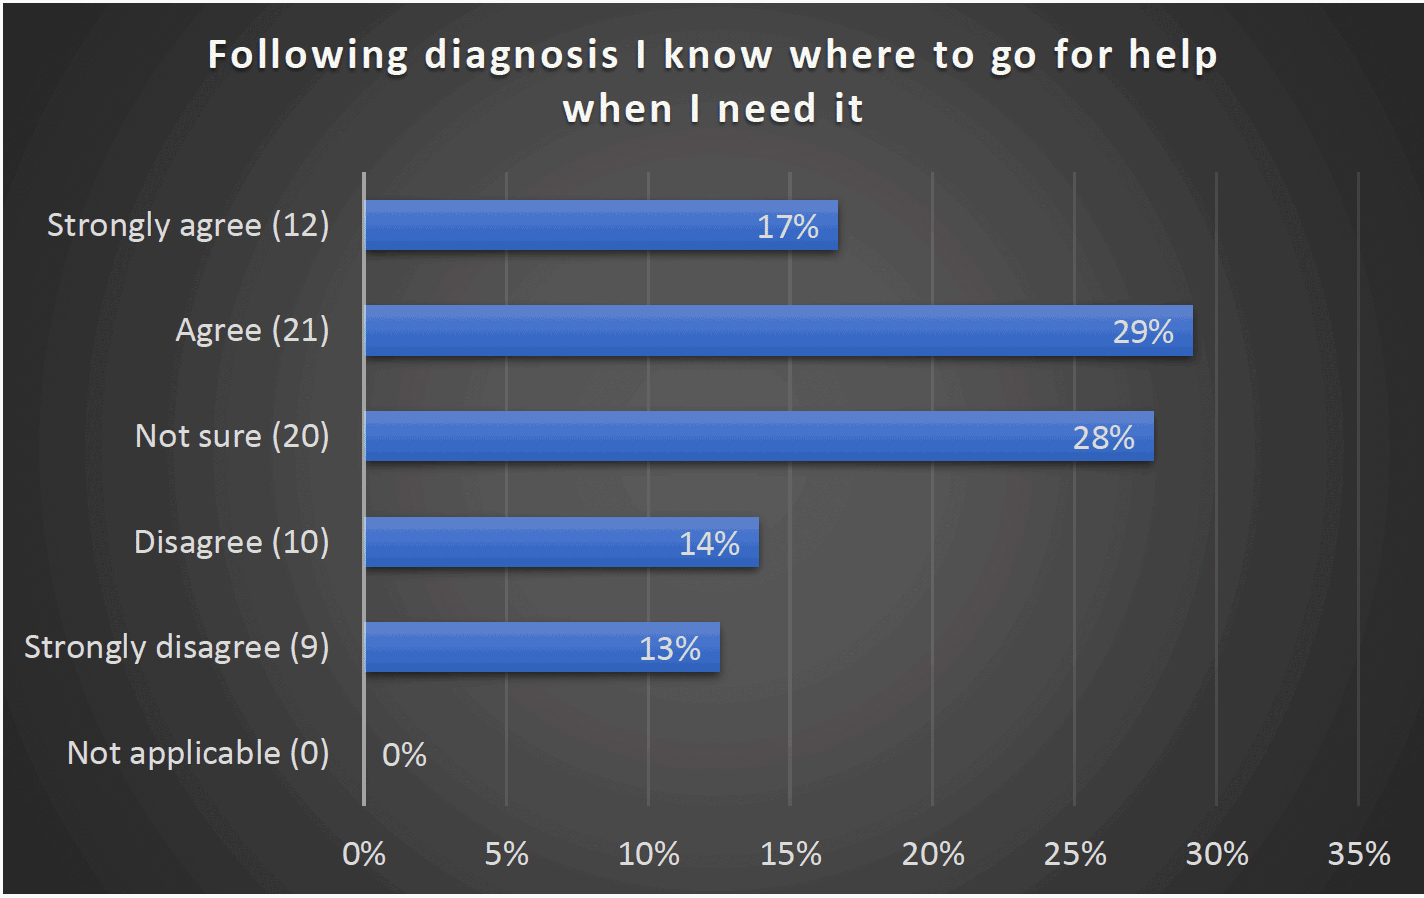 Following diagnosis I know where to go for help when I need it - Strongly agree (12) 17%, Agree (21) 29%, Not sure (20) 28%, Disagree (10) 14%, Strongly disagree (9) 13%, Not applicable 0